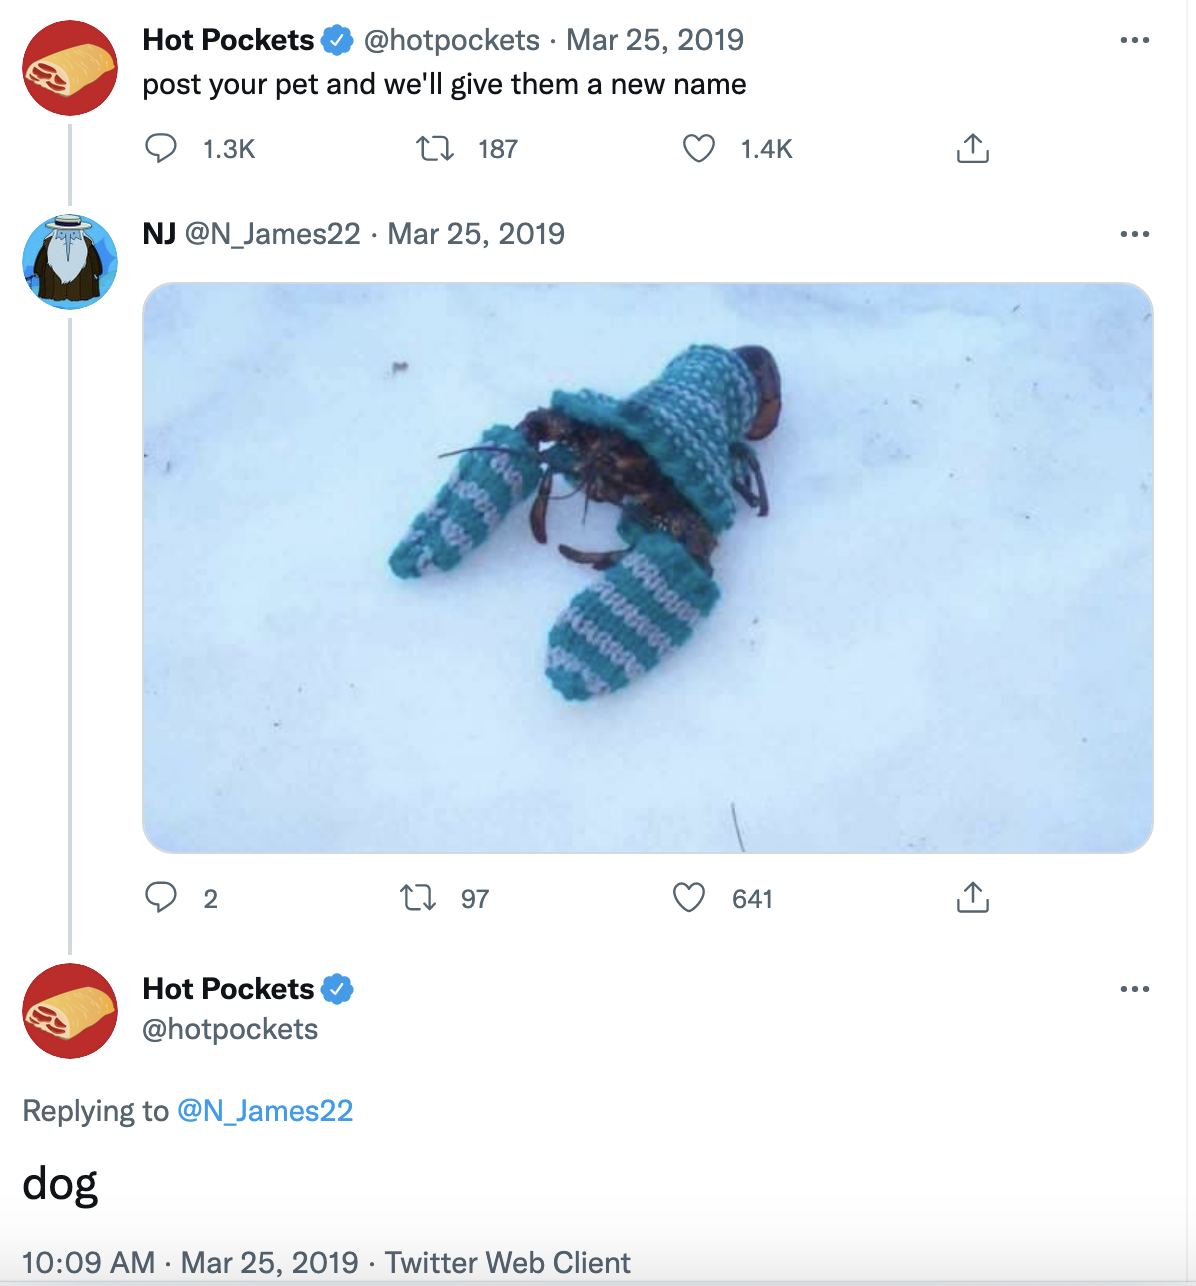 A tweet from Hot Pockets asking people to show their pet and they&#x27;ll name them, someone responds with a photo of a lobster wearing mittens, and Hot Pockets responds with &quot;dog&quot;